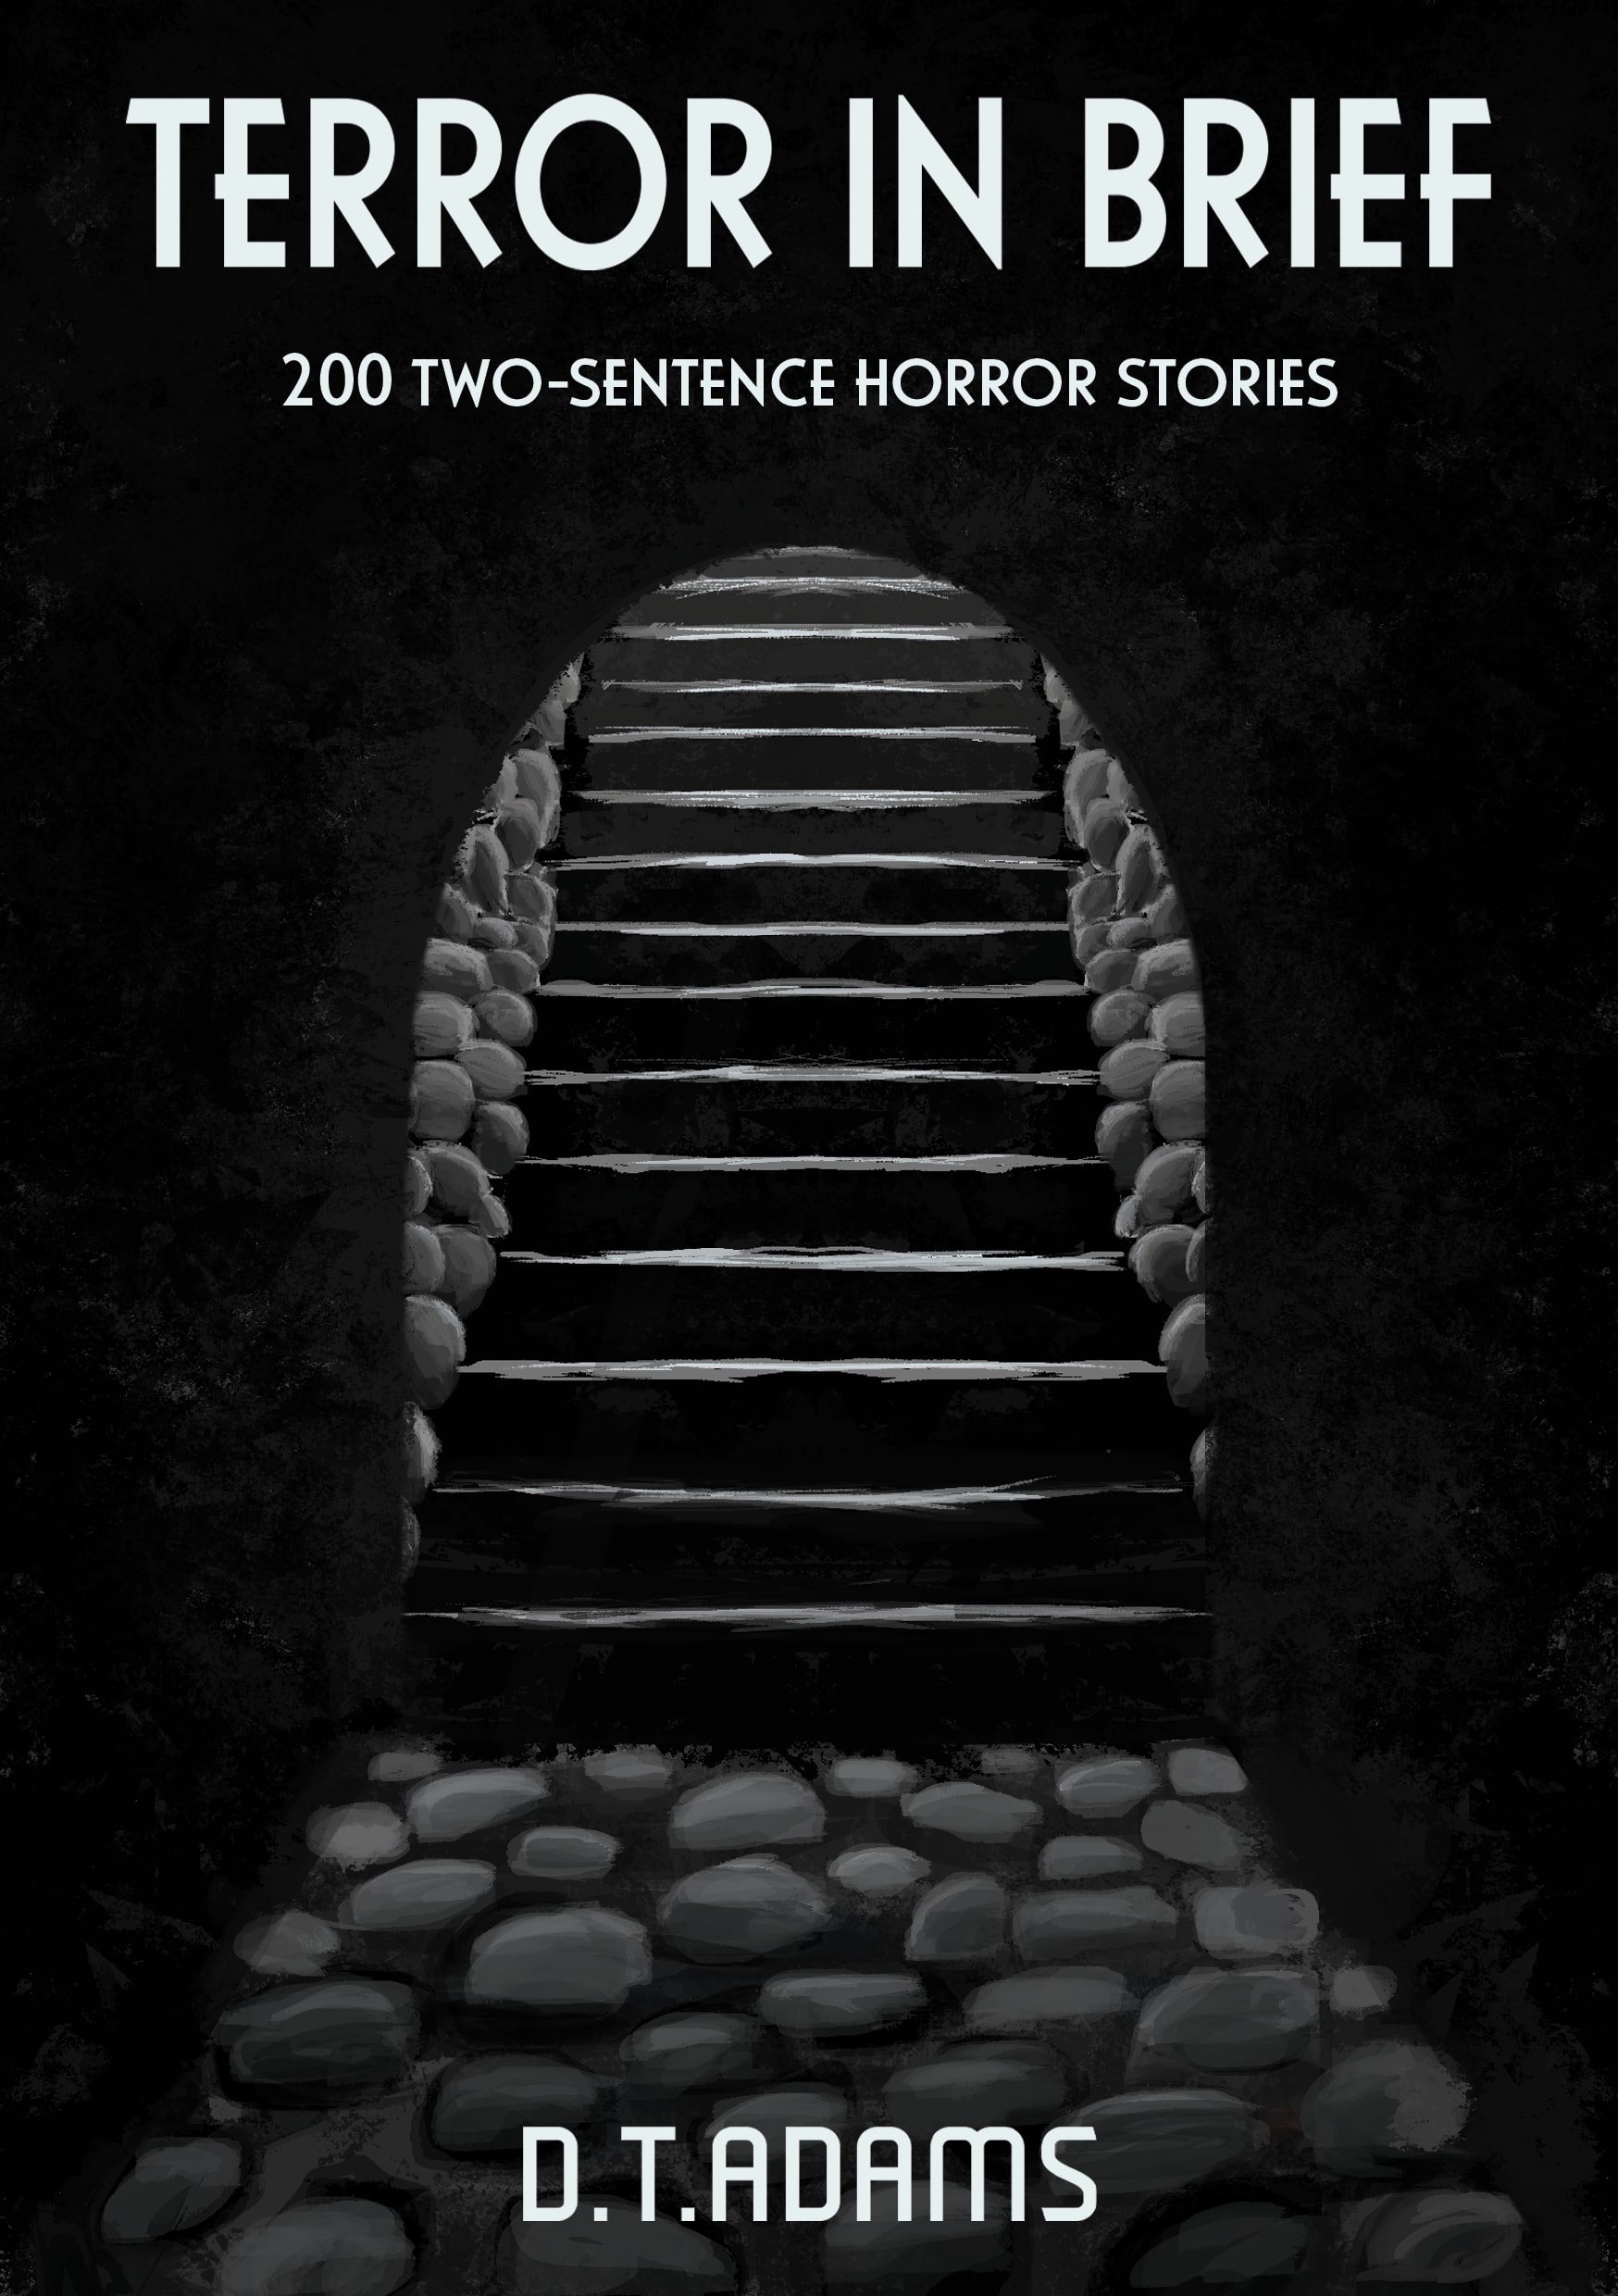 FREE: Terror in Brief: 200 Two-Sentence Horror Stories by D. T. Adams